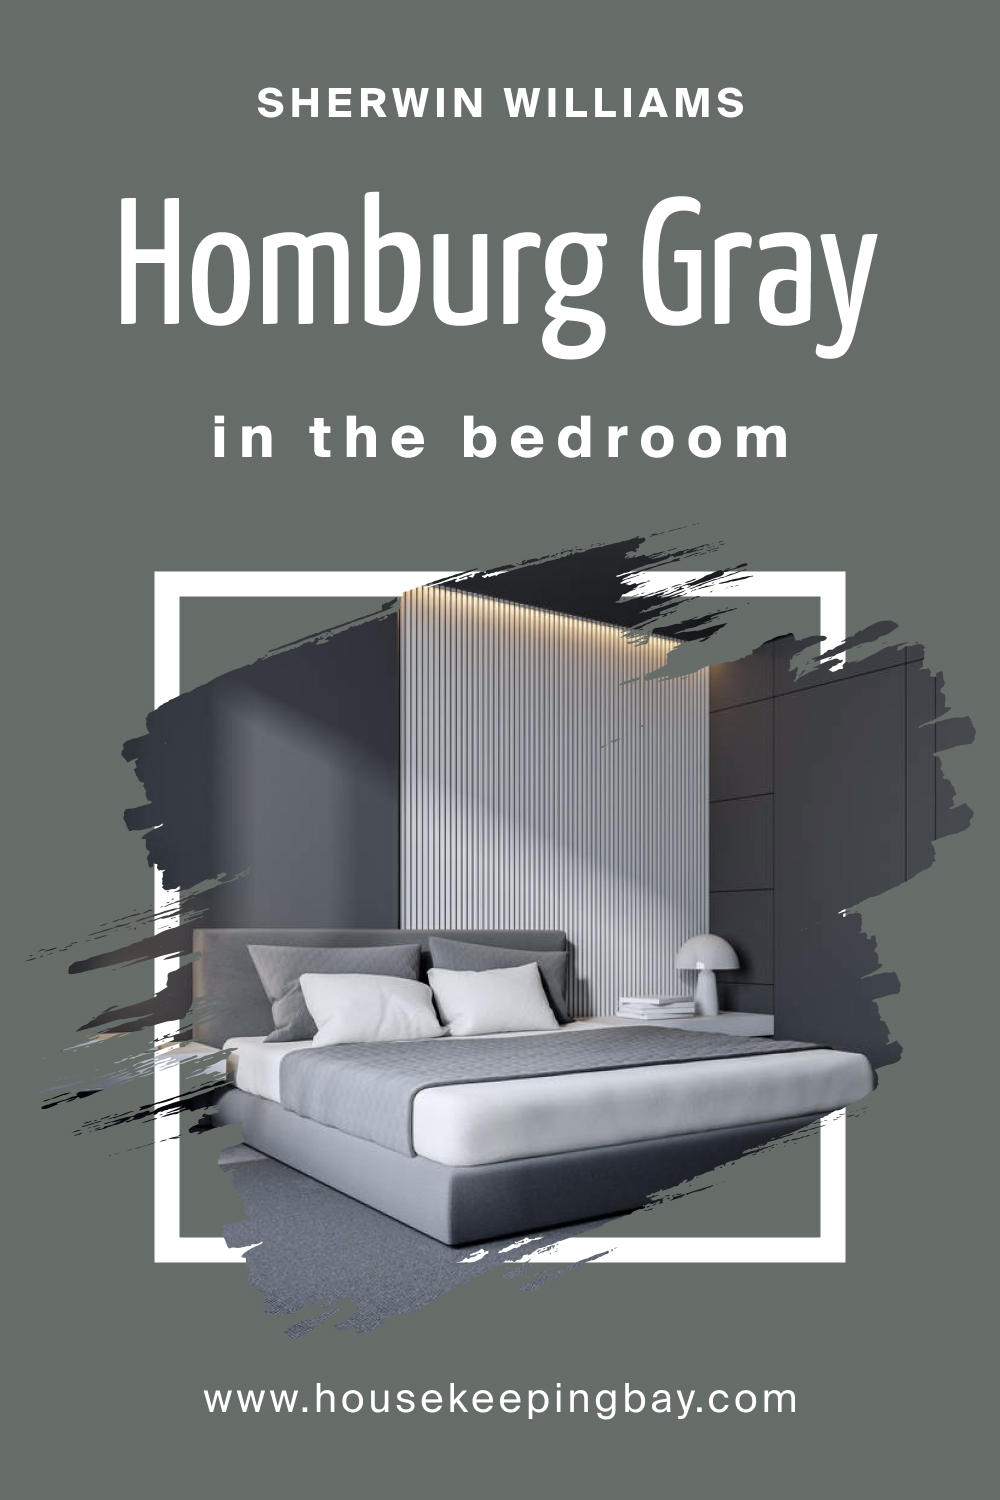 Sherwin Williams. SW 7622 Homburg Gray For the bedroom